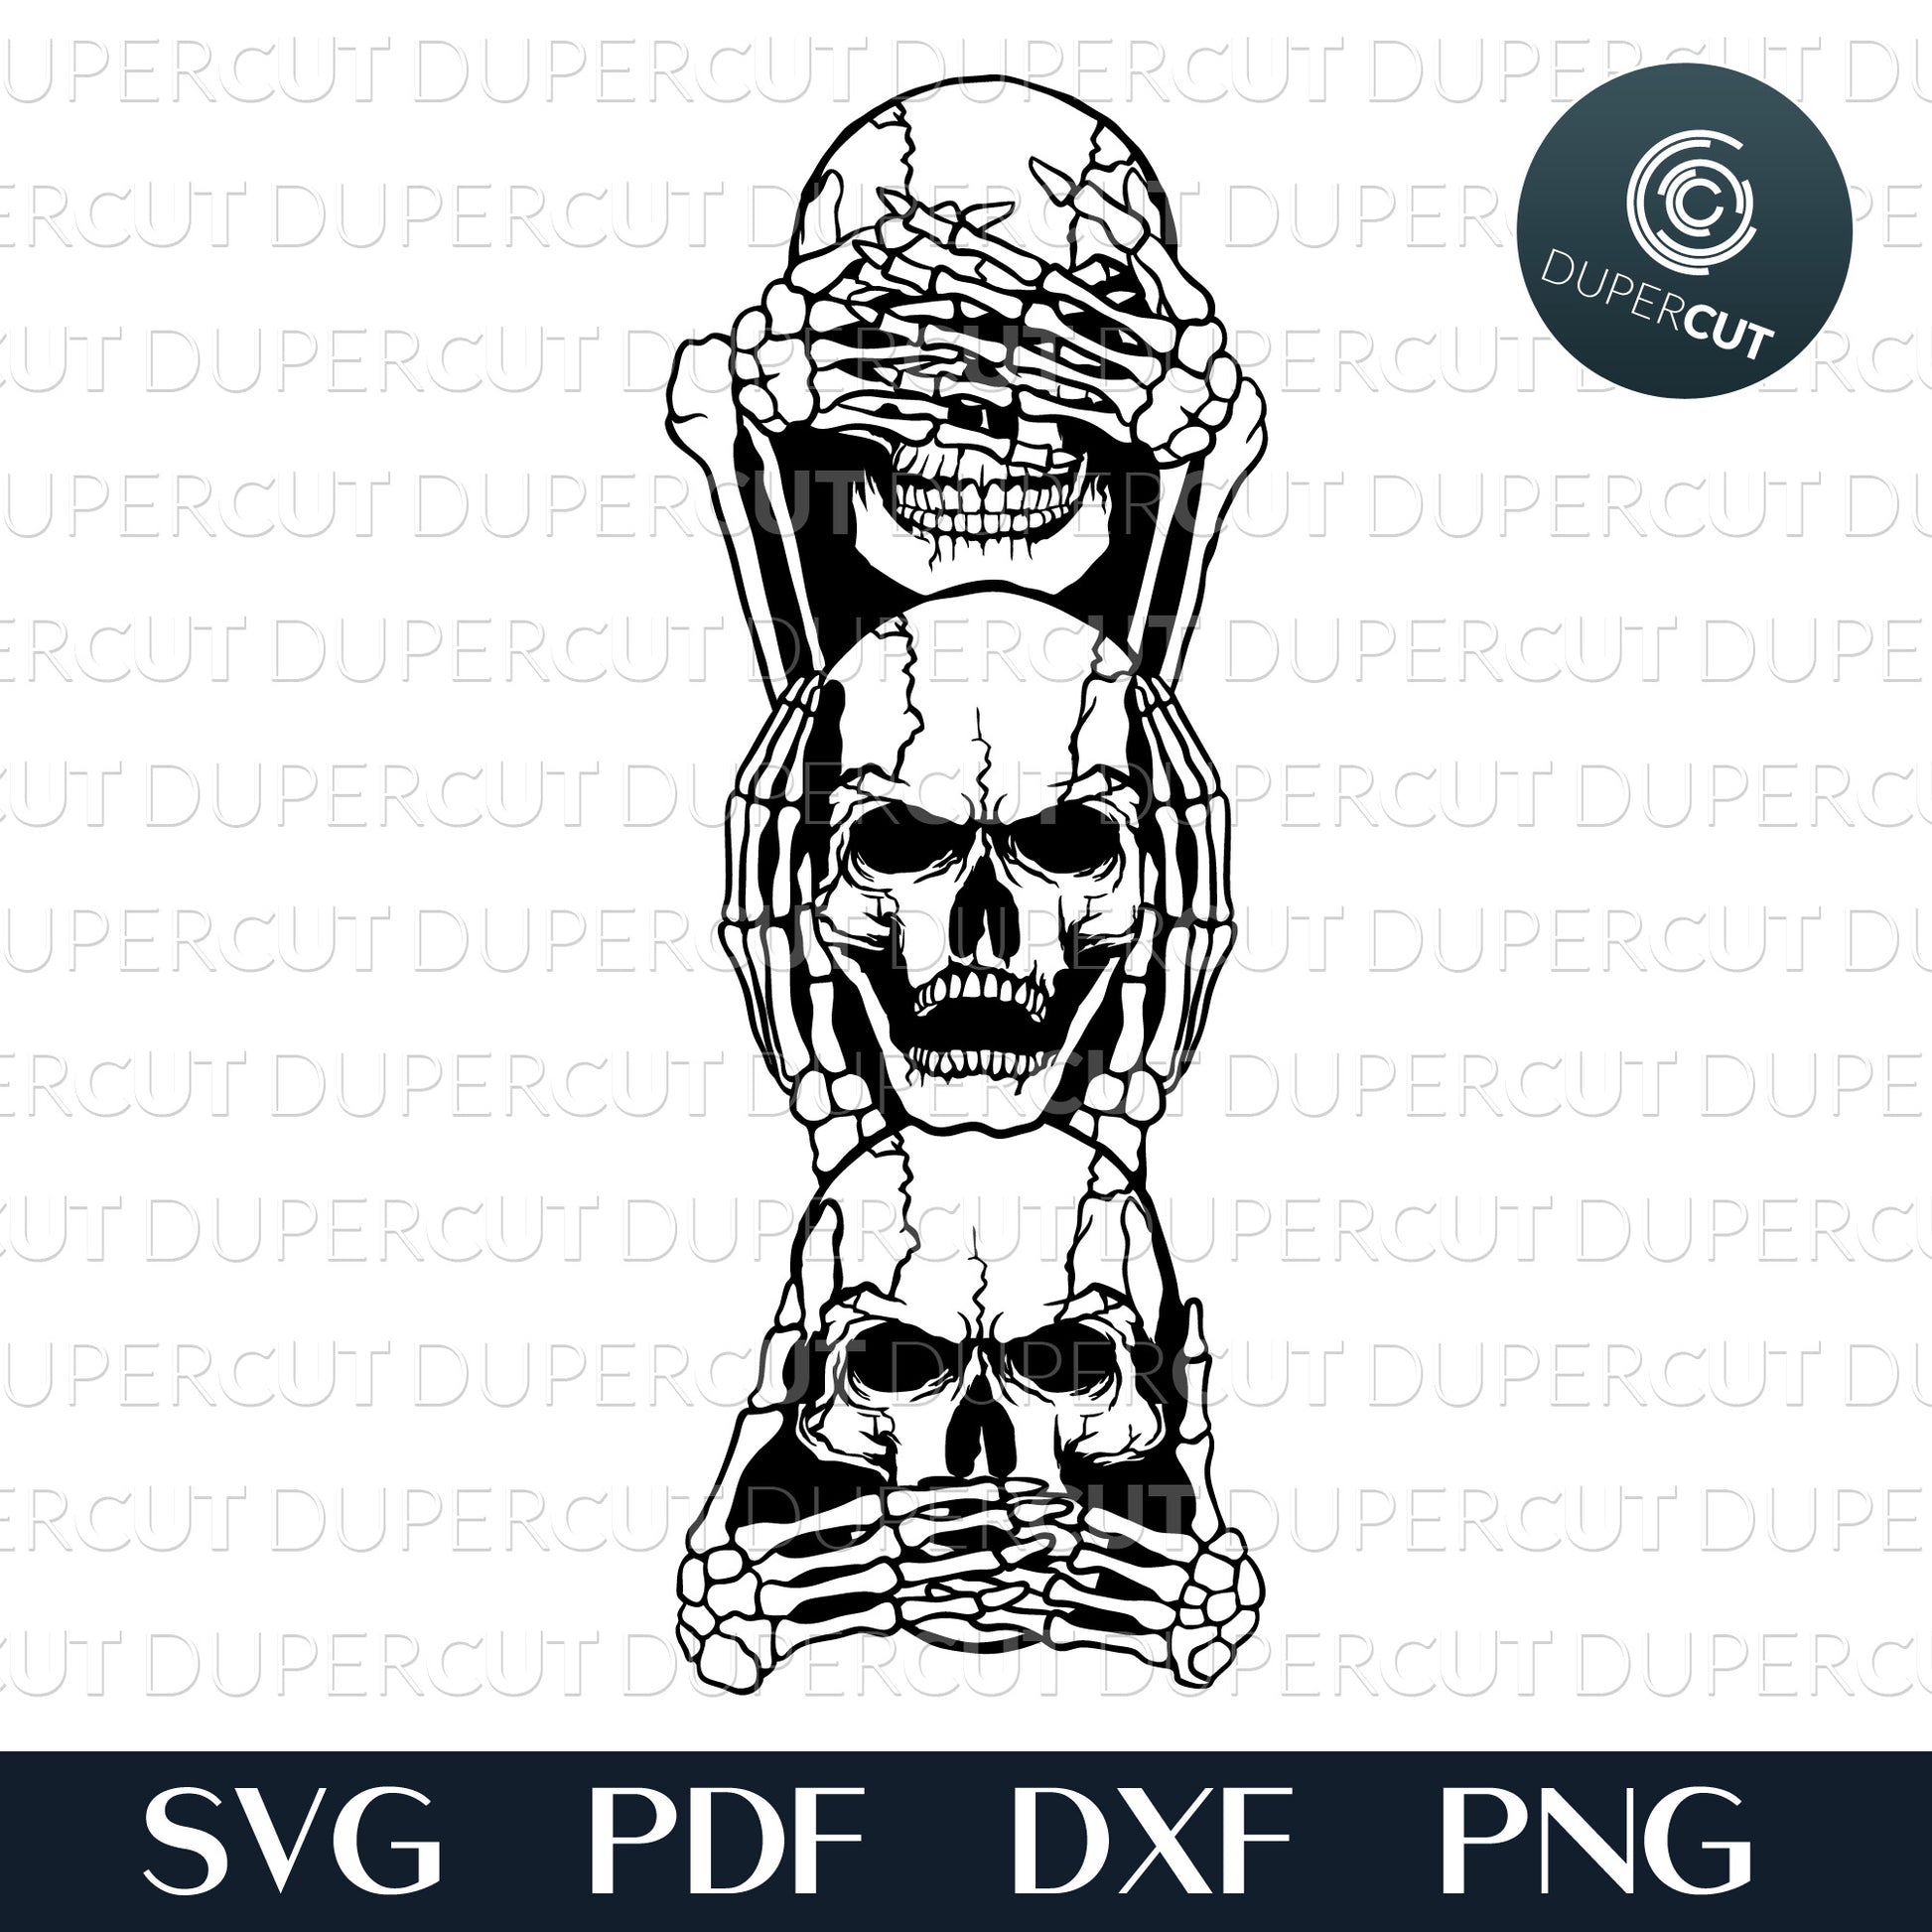 Steampunk Skulls See no evil, hear no evil, speak no evil. SVG JPEG DXF files. Template for paper cutting, laser, print on demand. For use with Cricut, Glowforge, Silhouette Cameo, CNC machines. Personal or commercial license.